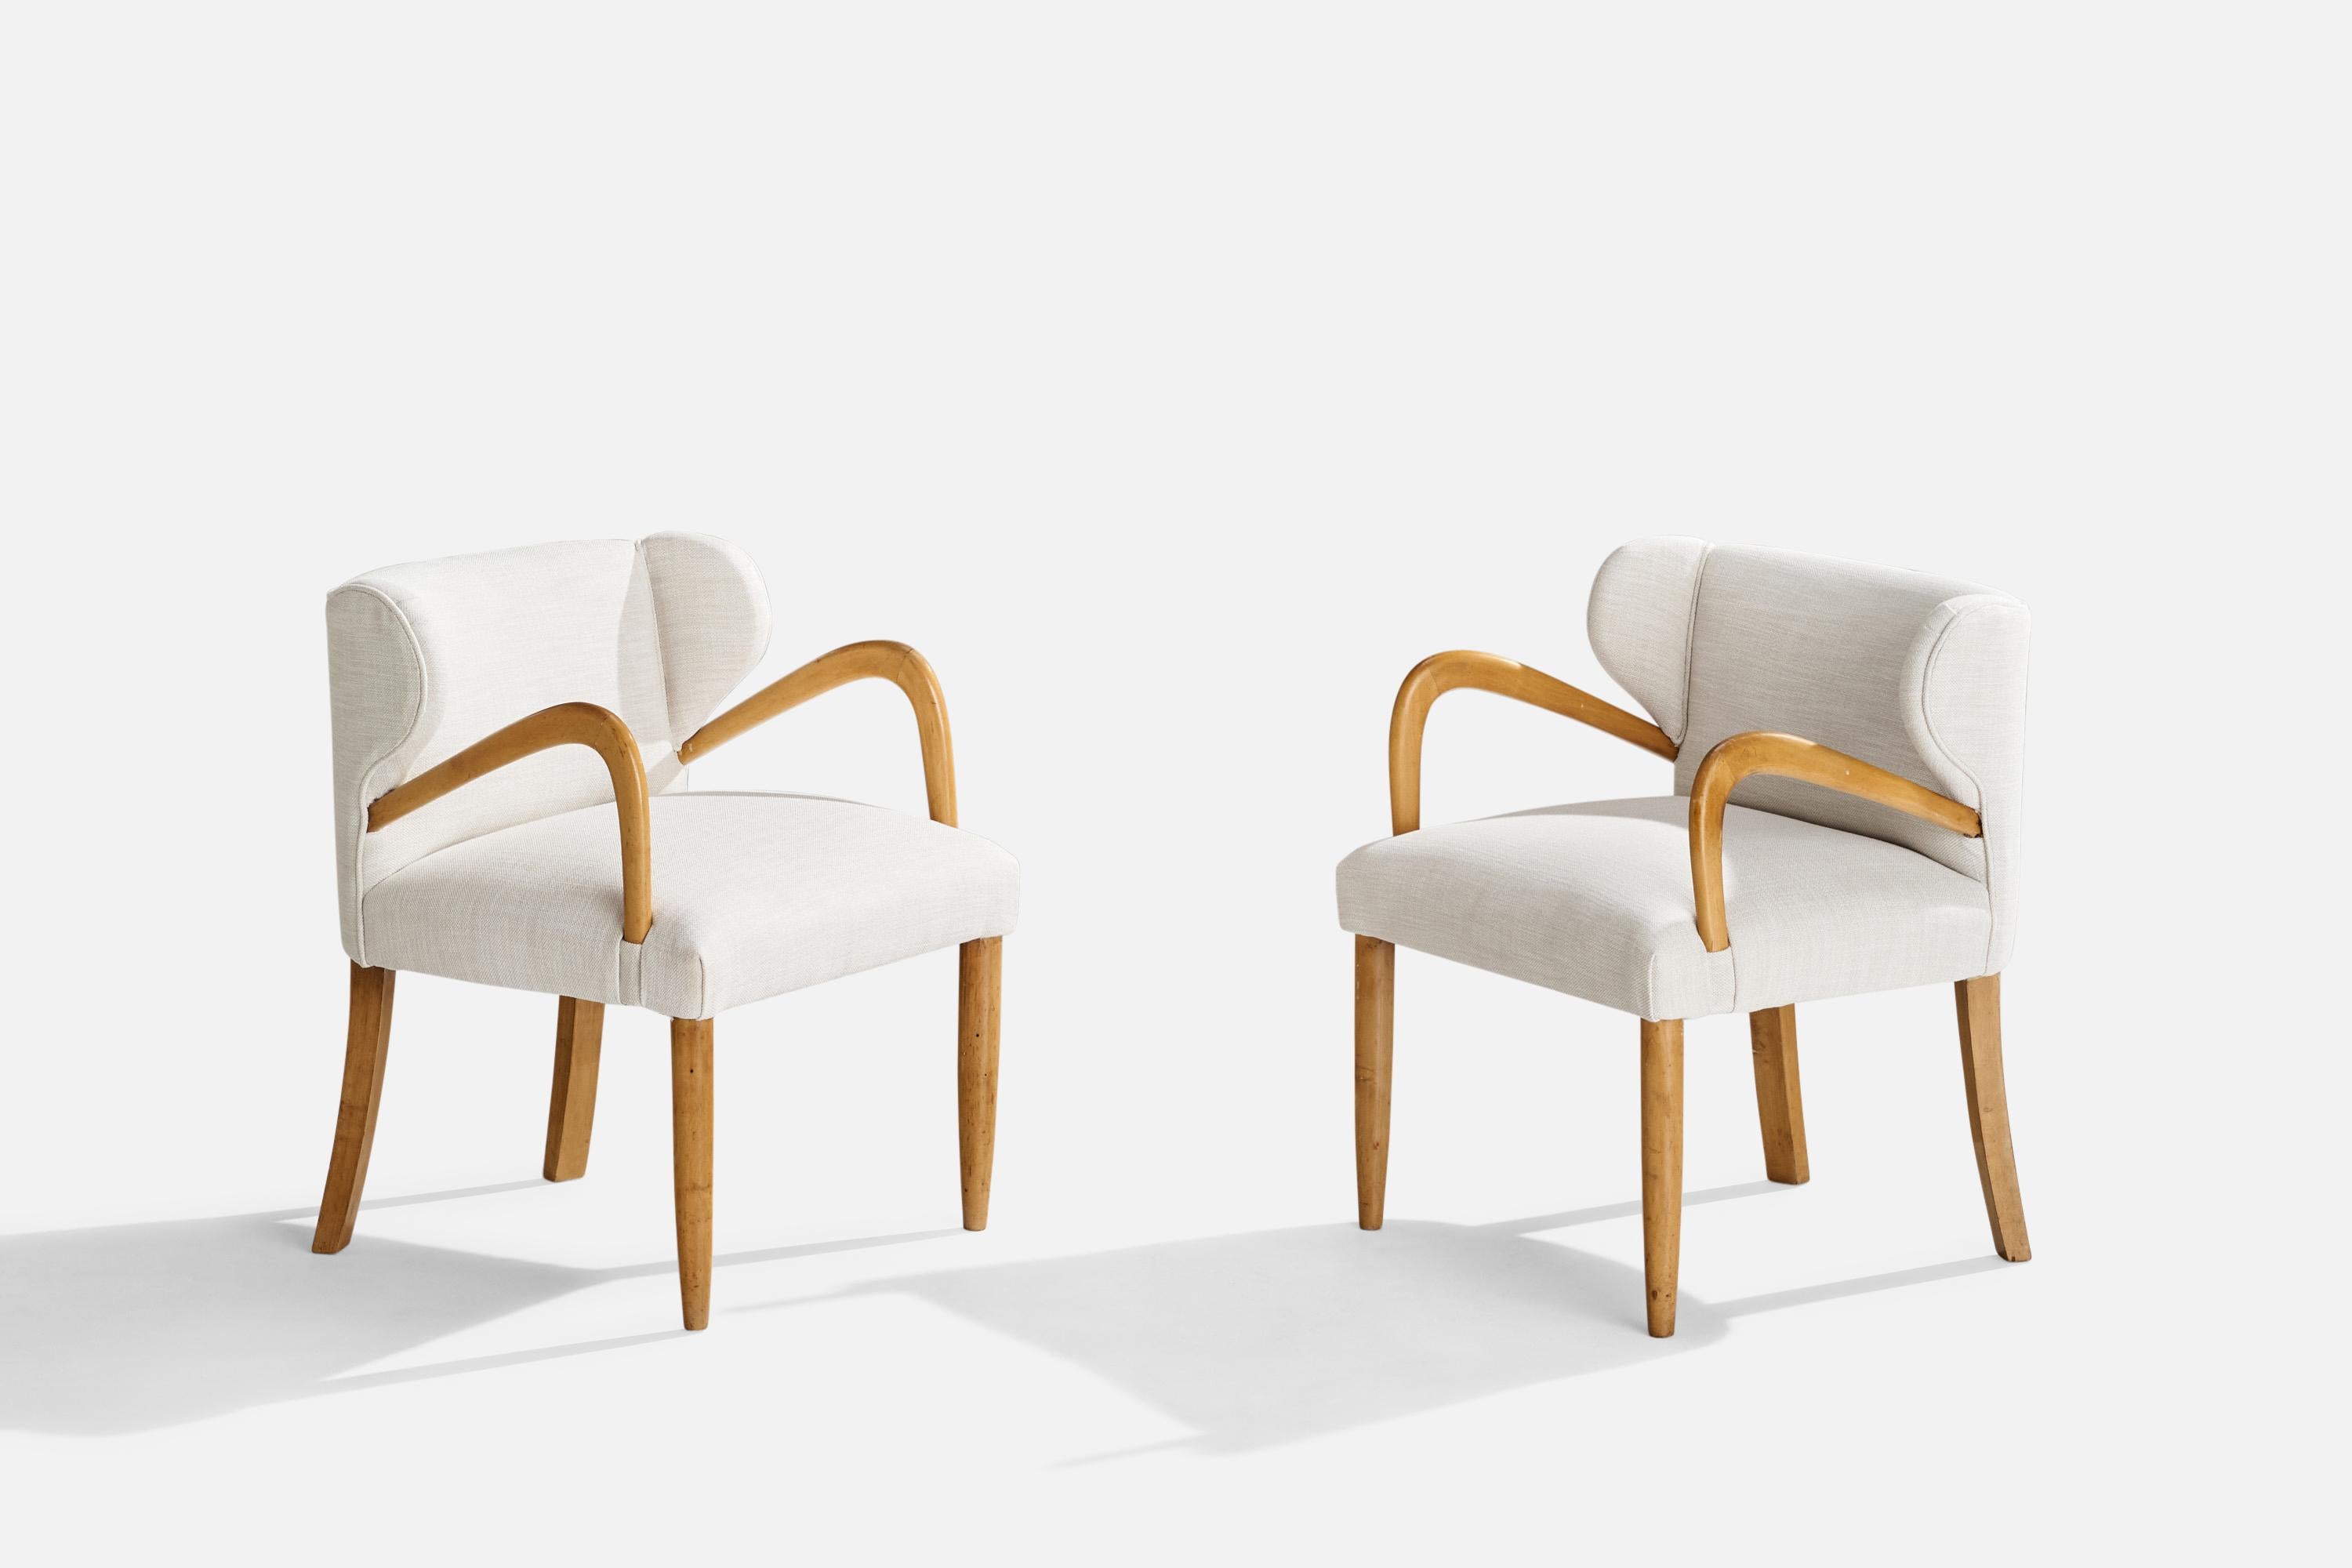 A pair of wood and white fabric armchairs designed and produced in Italy, c. 1940s.

Seat height: 16”